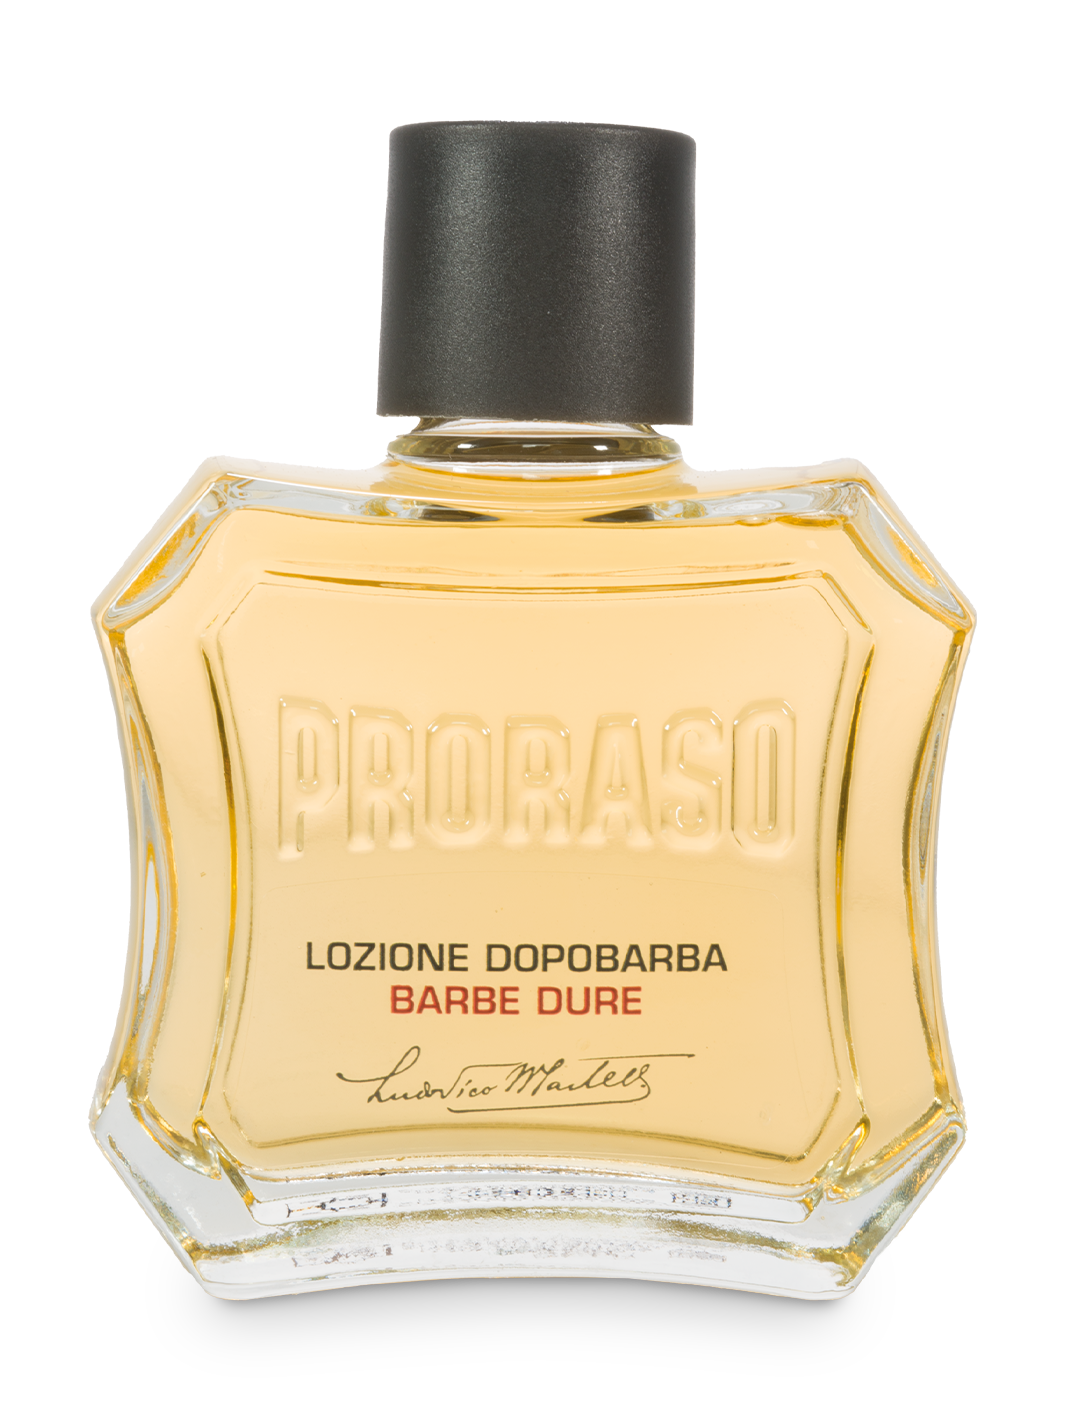 Proraso After Shave Lotion Pflegend 100ml